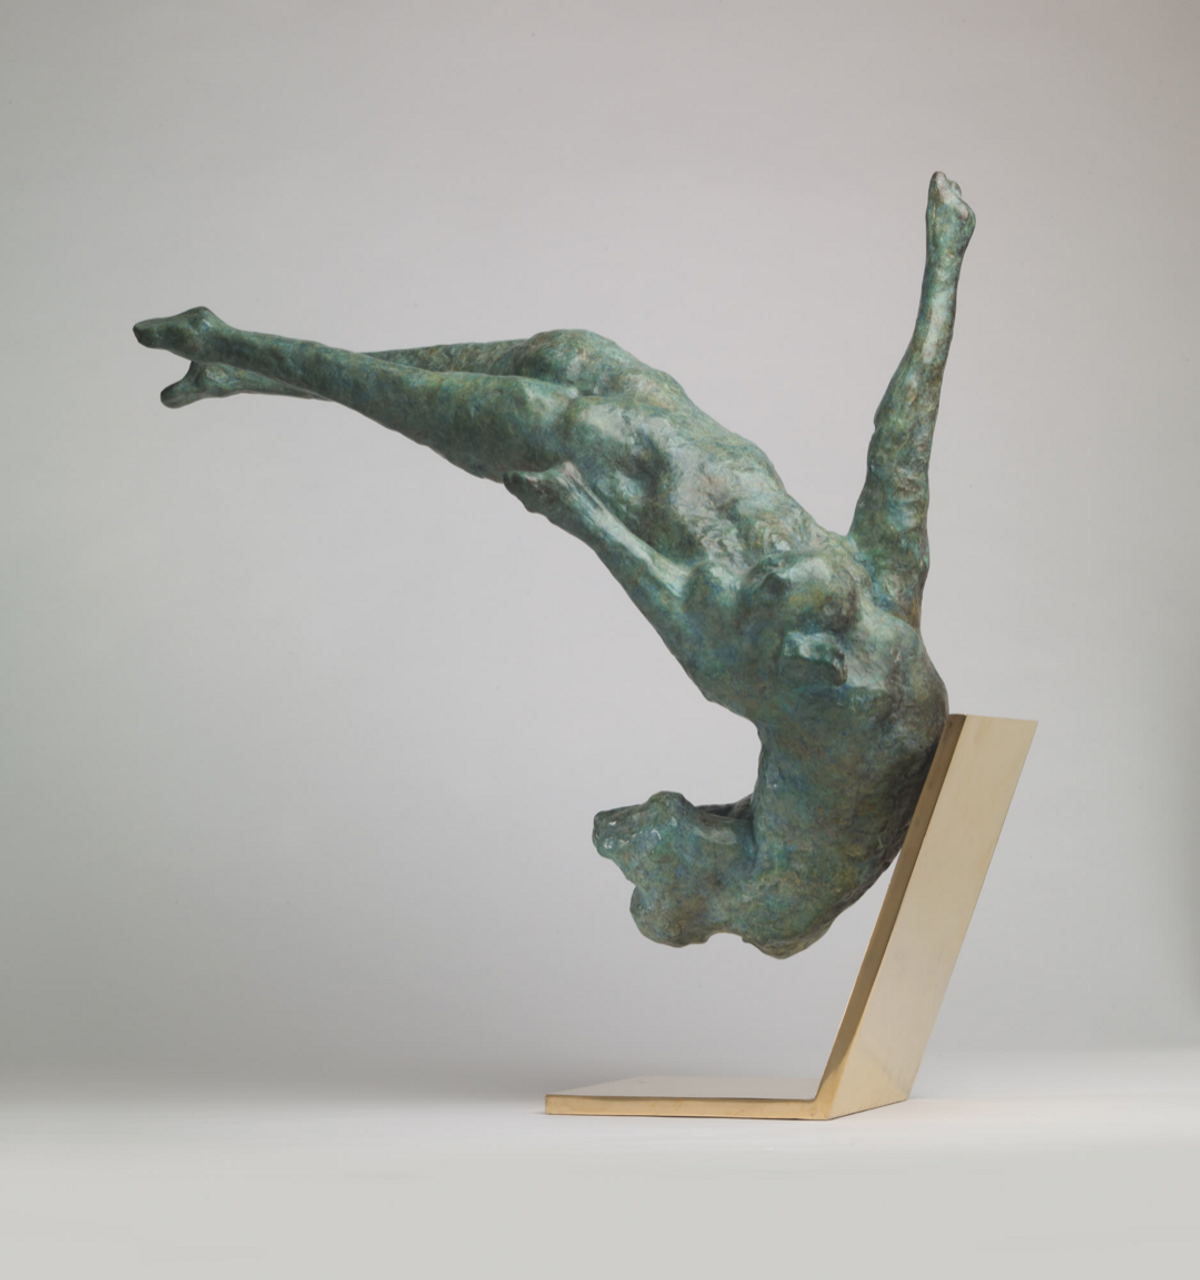 Ralph Brown's Swimming Movement (1960) is one of the sculptures available for hire Courtesy of Pangolin London